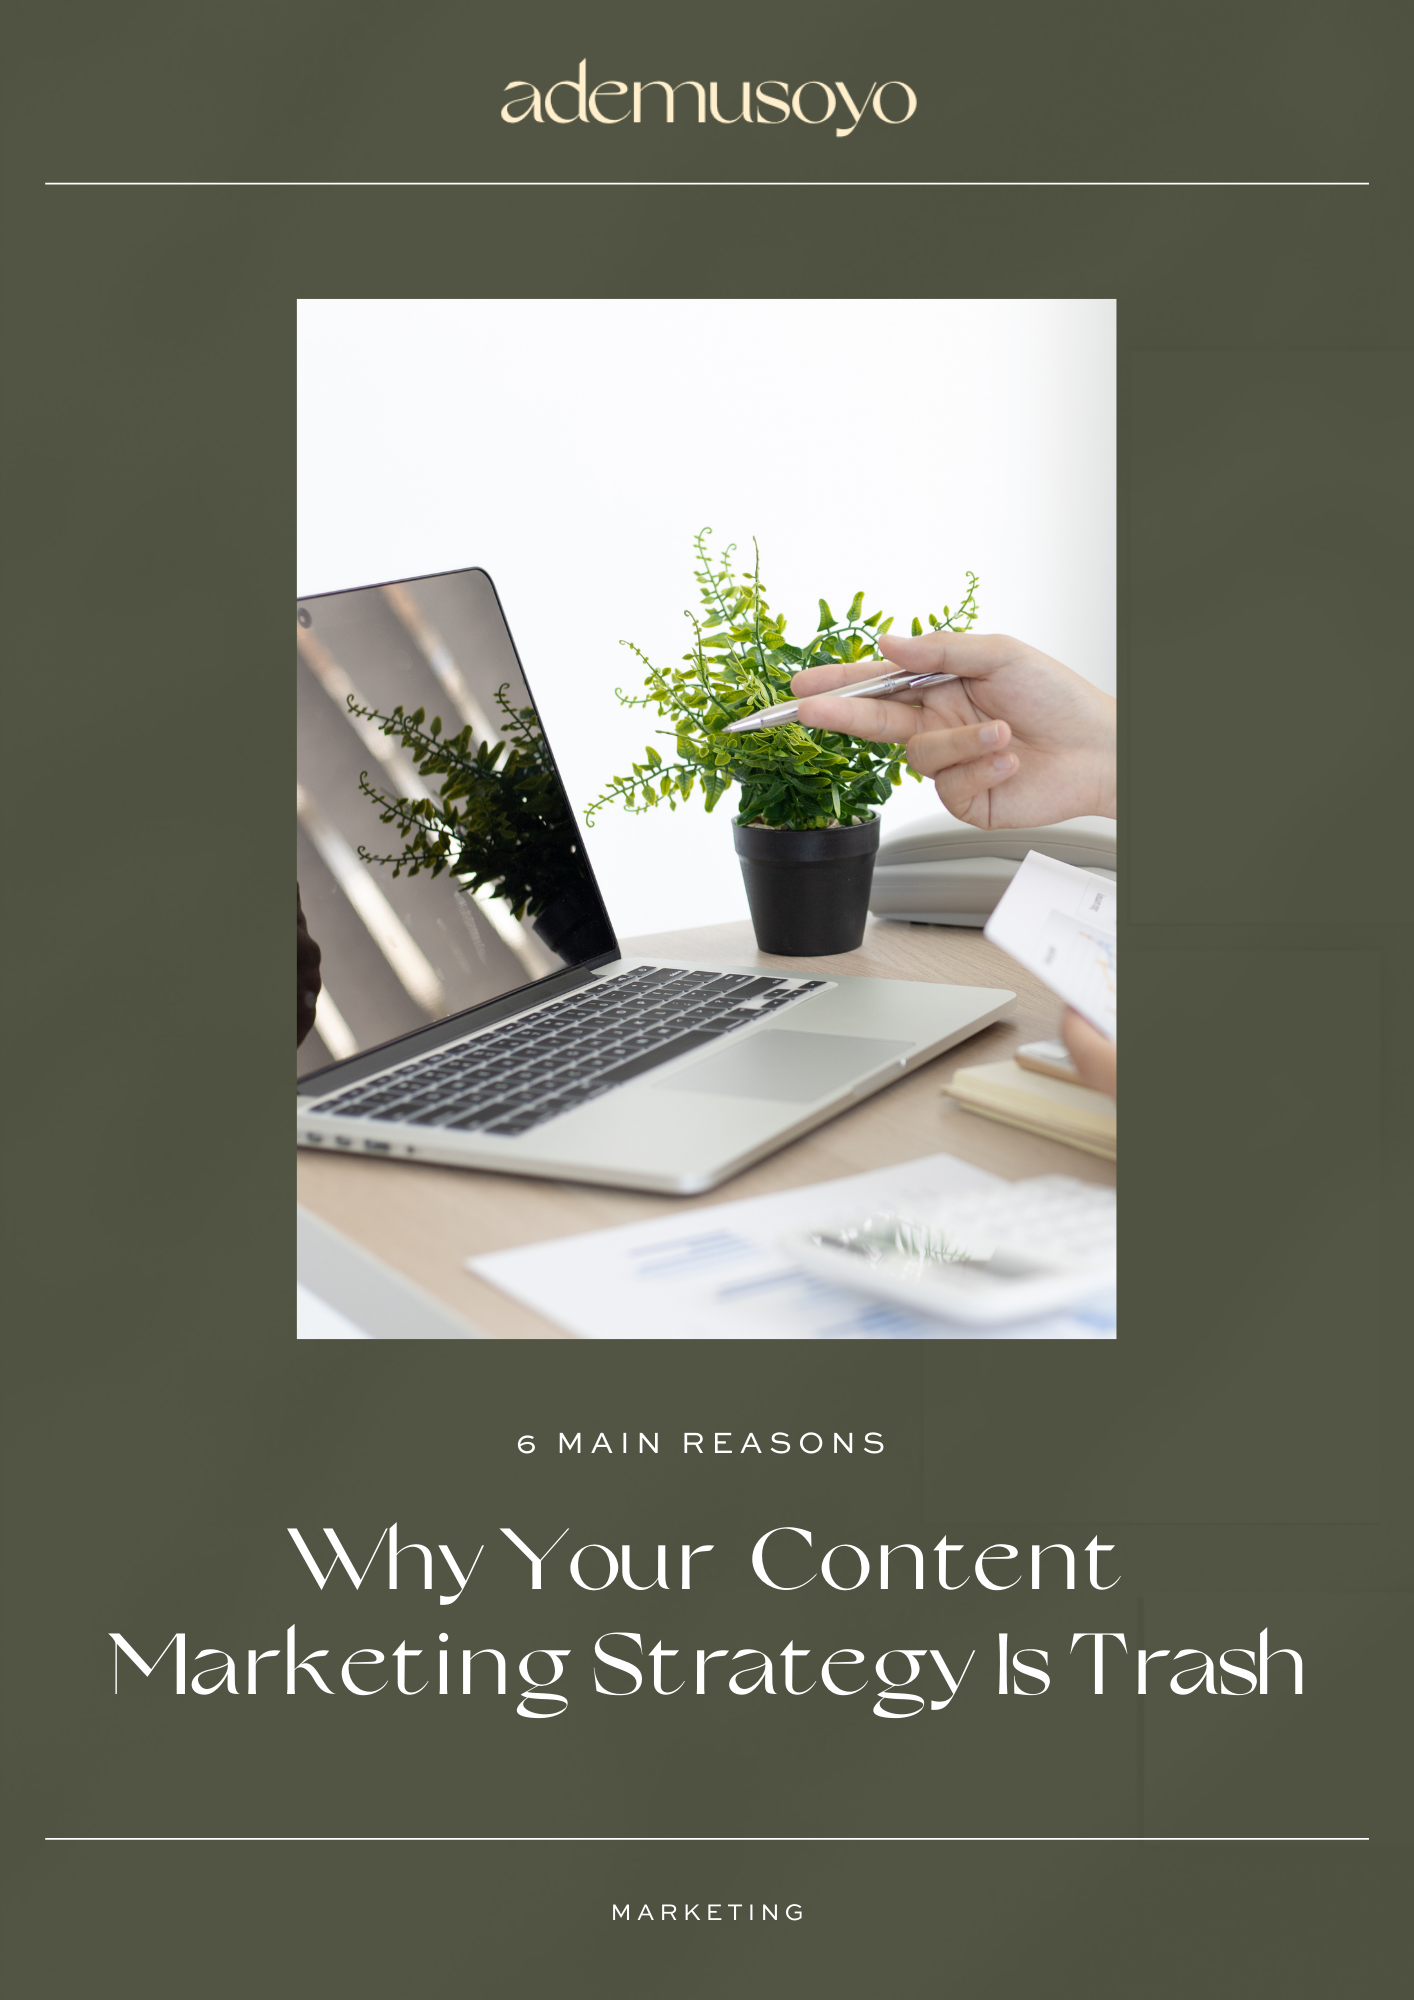 6 Main Reasons Why Your Content Marketing Strategy Is Trash